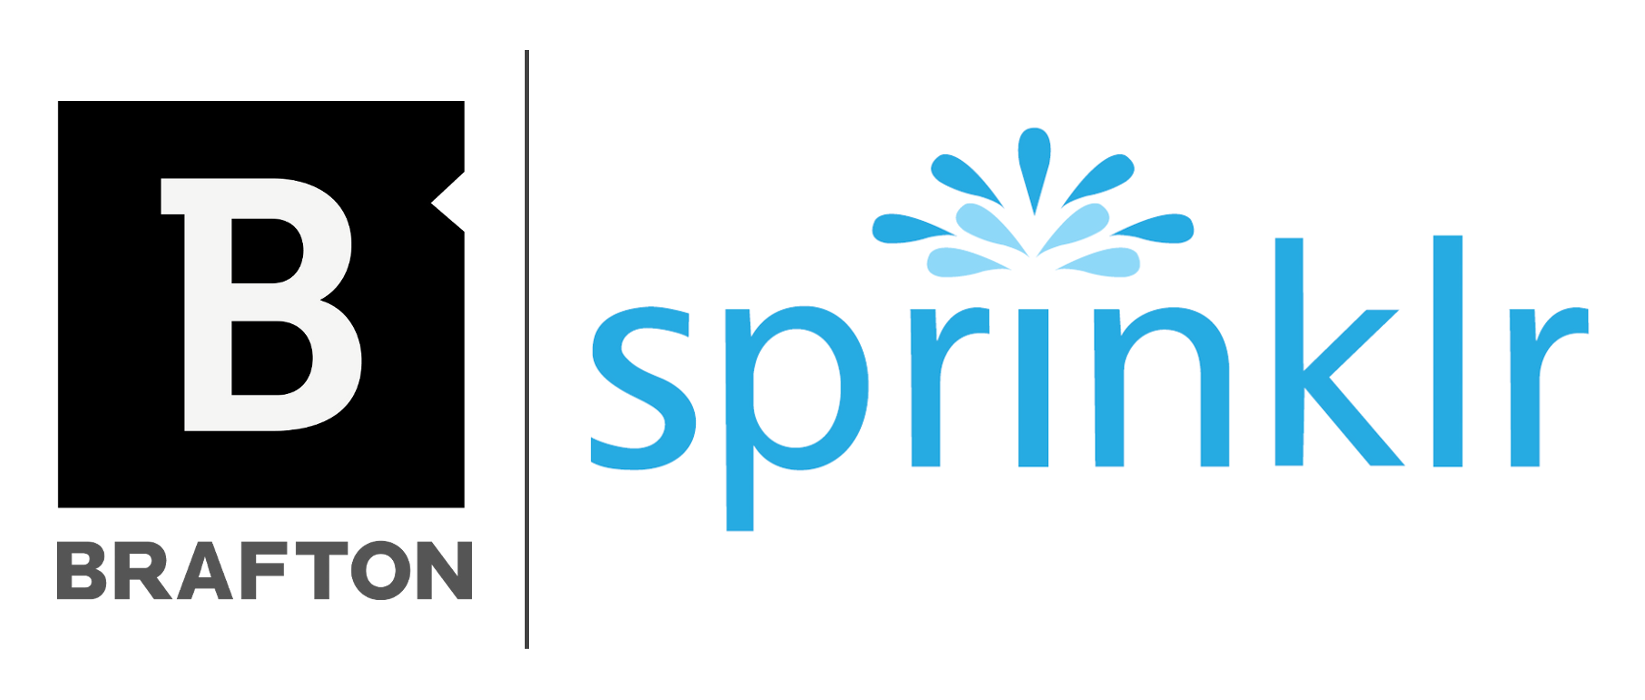 Brafton partners with Sprinklr to provide clients with smarter social analytics.